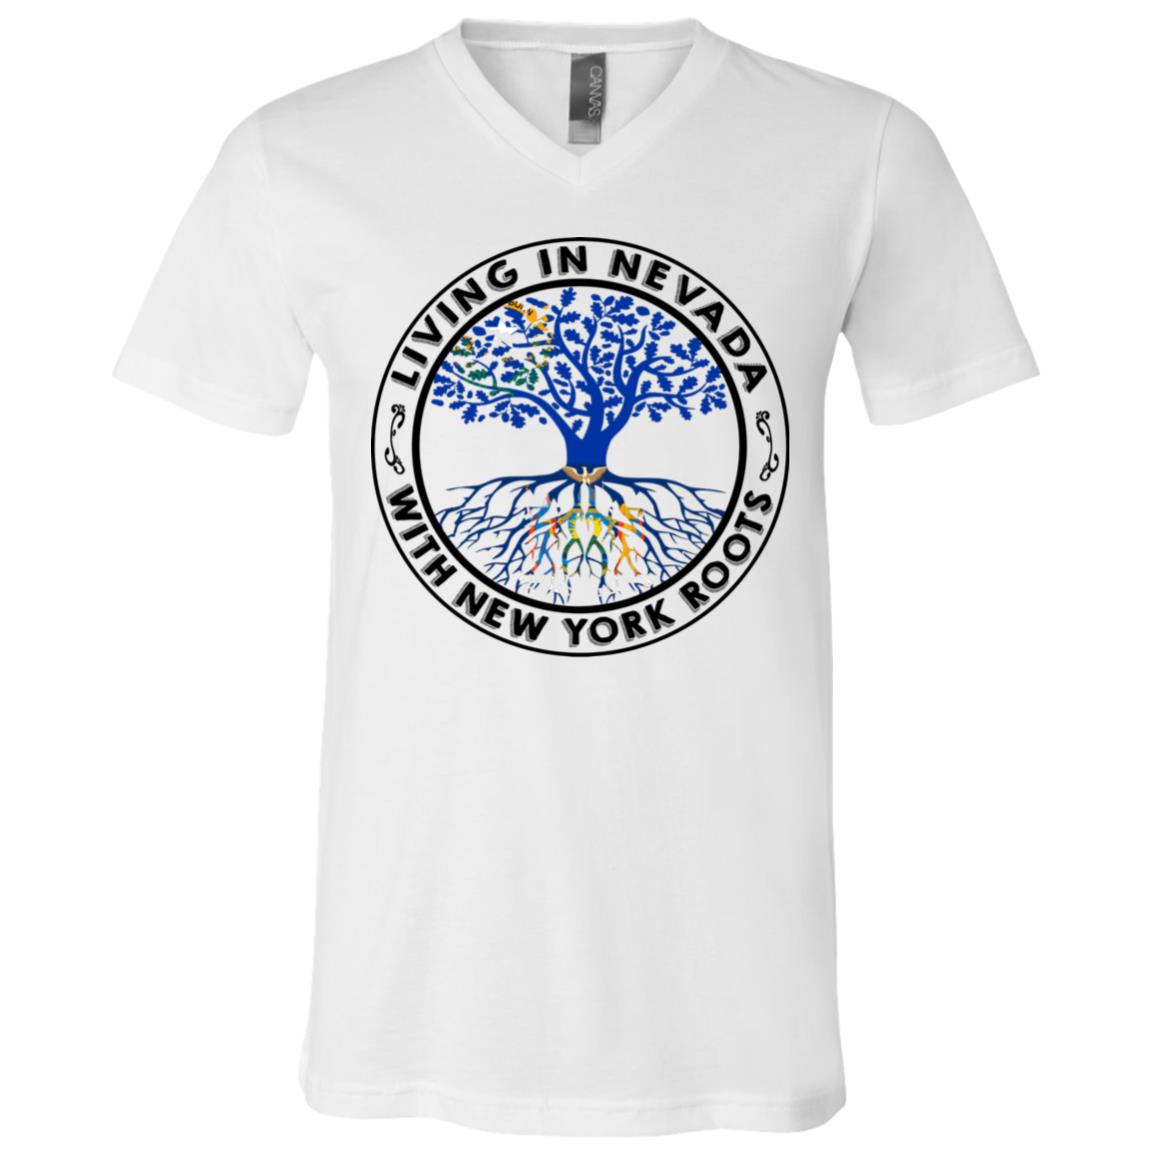 Living In Nevada With New York Roots T-Shirt - T-shirt Teezalo